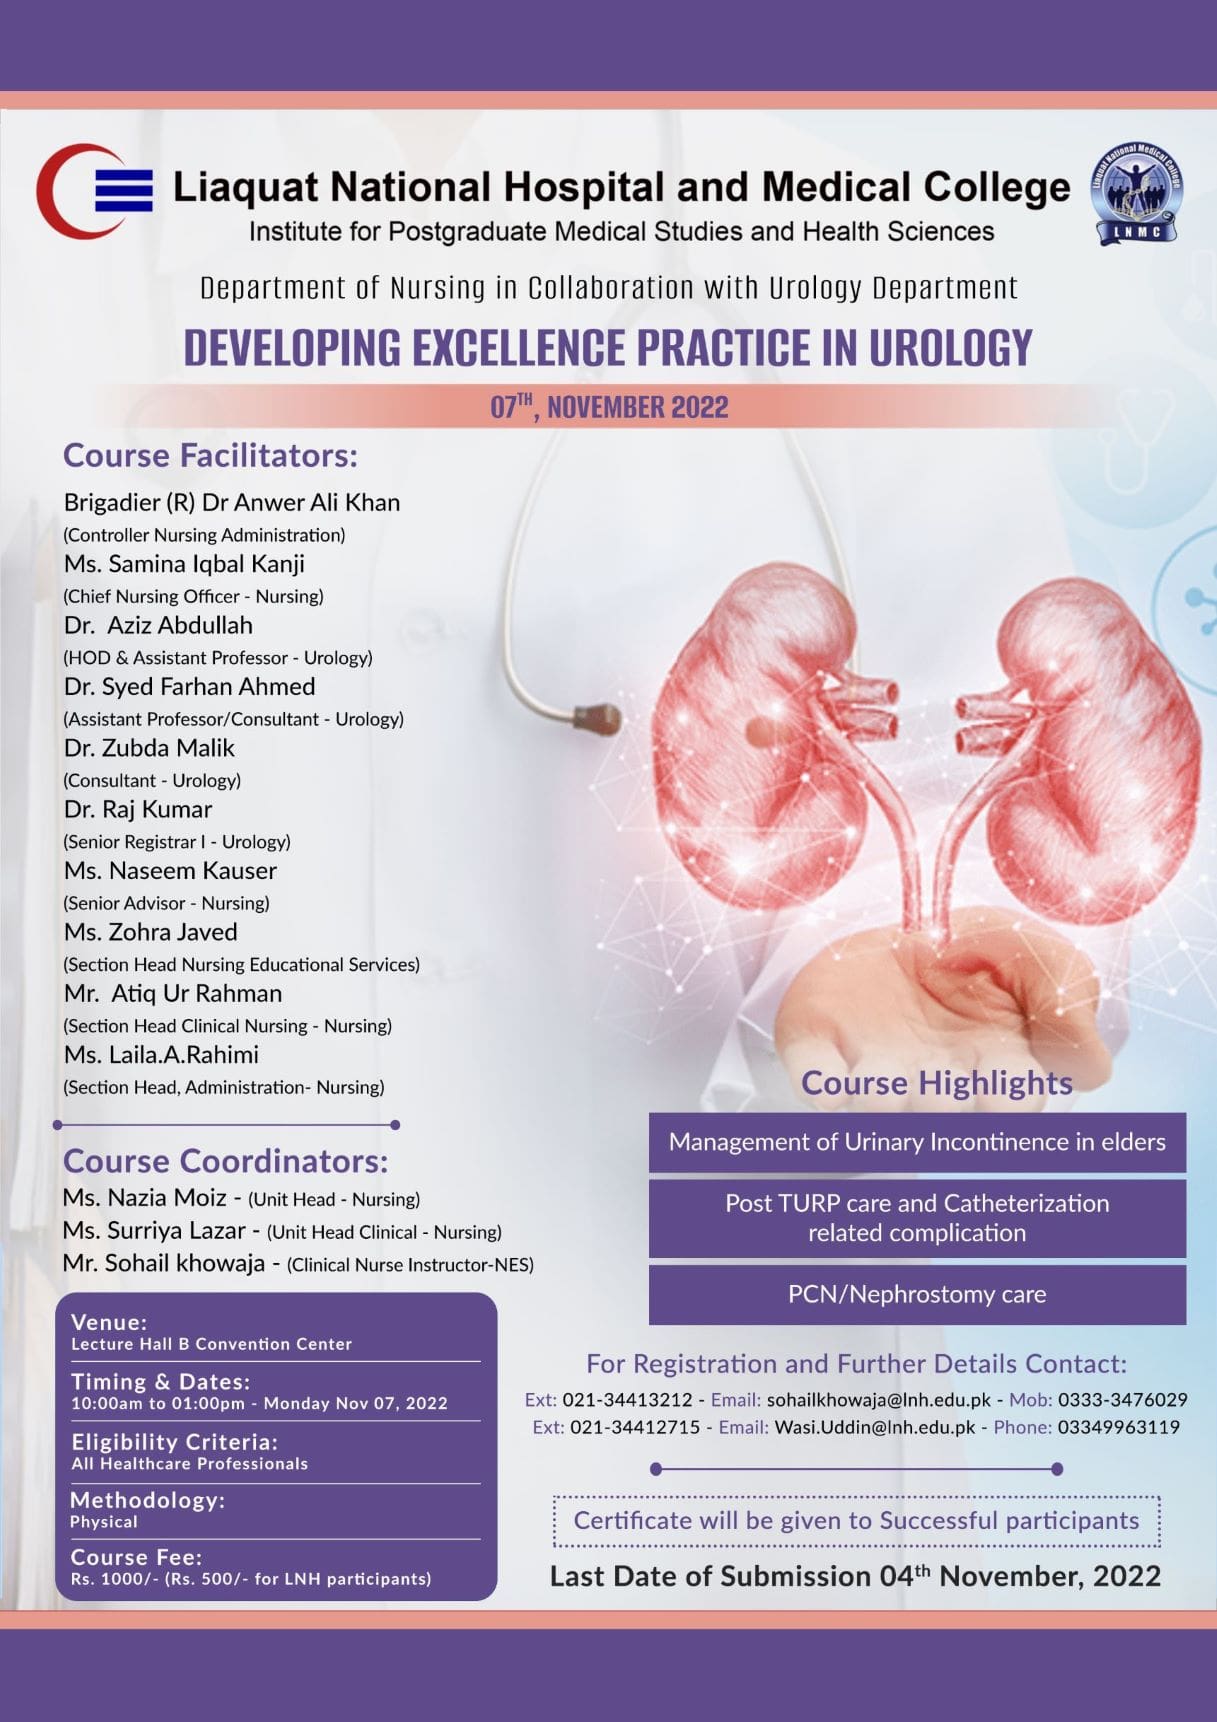 Course and Workshop on Developing Excellence Practice in Urology on Nov 7, 2022